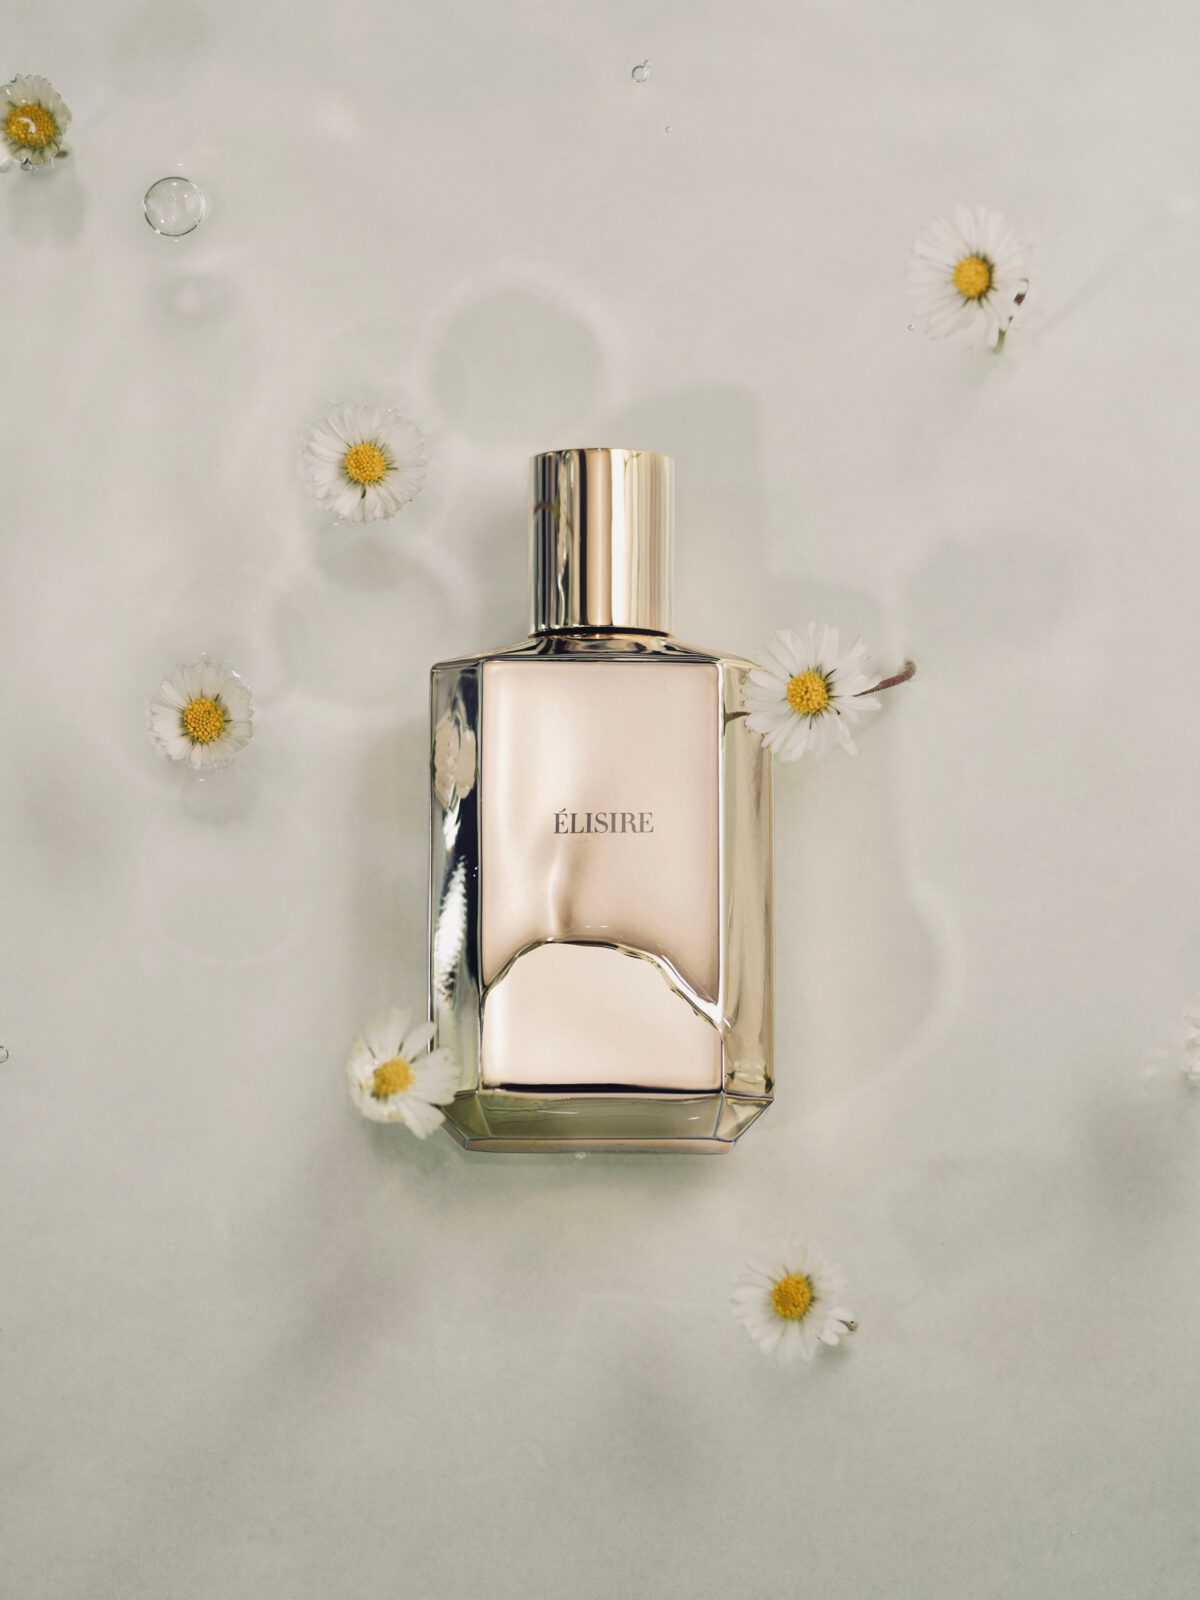 elisire, beauty, beauty product, fragrance, perfume, scent, productphotography, stilllife, photography, klas foerster